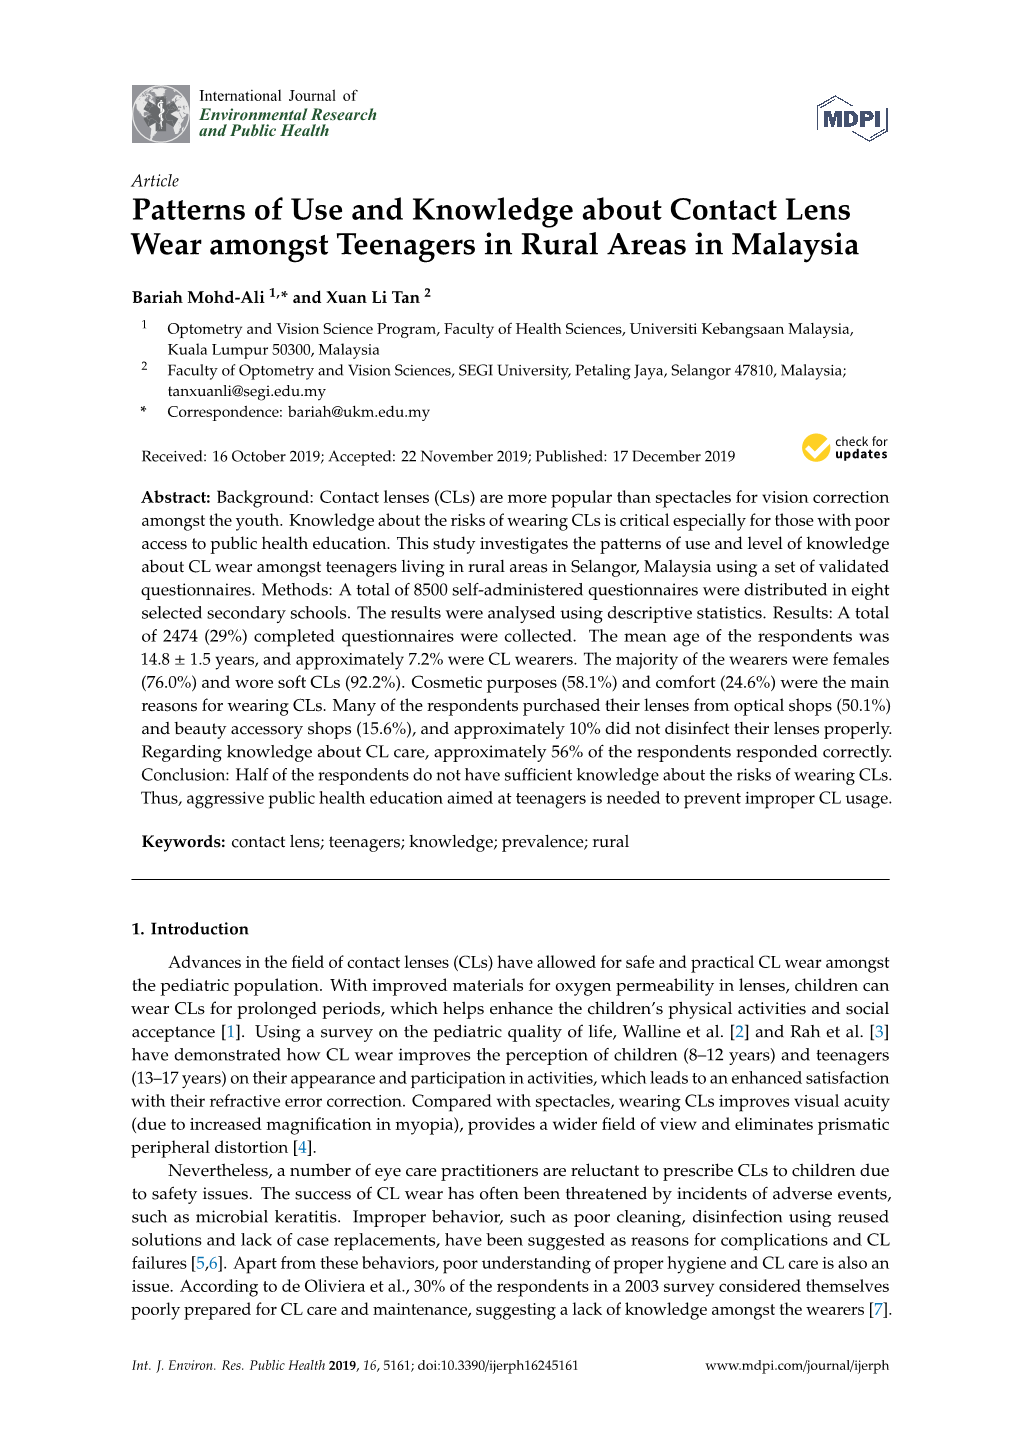 Patterns of Use and Knowledge About Contact Lens Wear Amongst Teenagers in Rural Areas in Malaysia